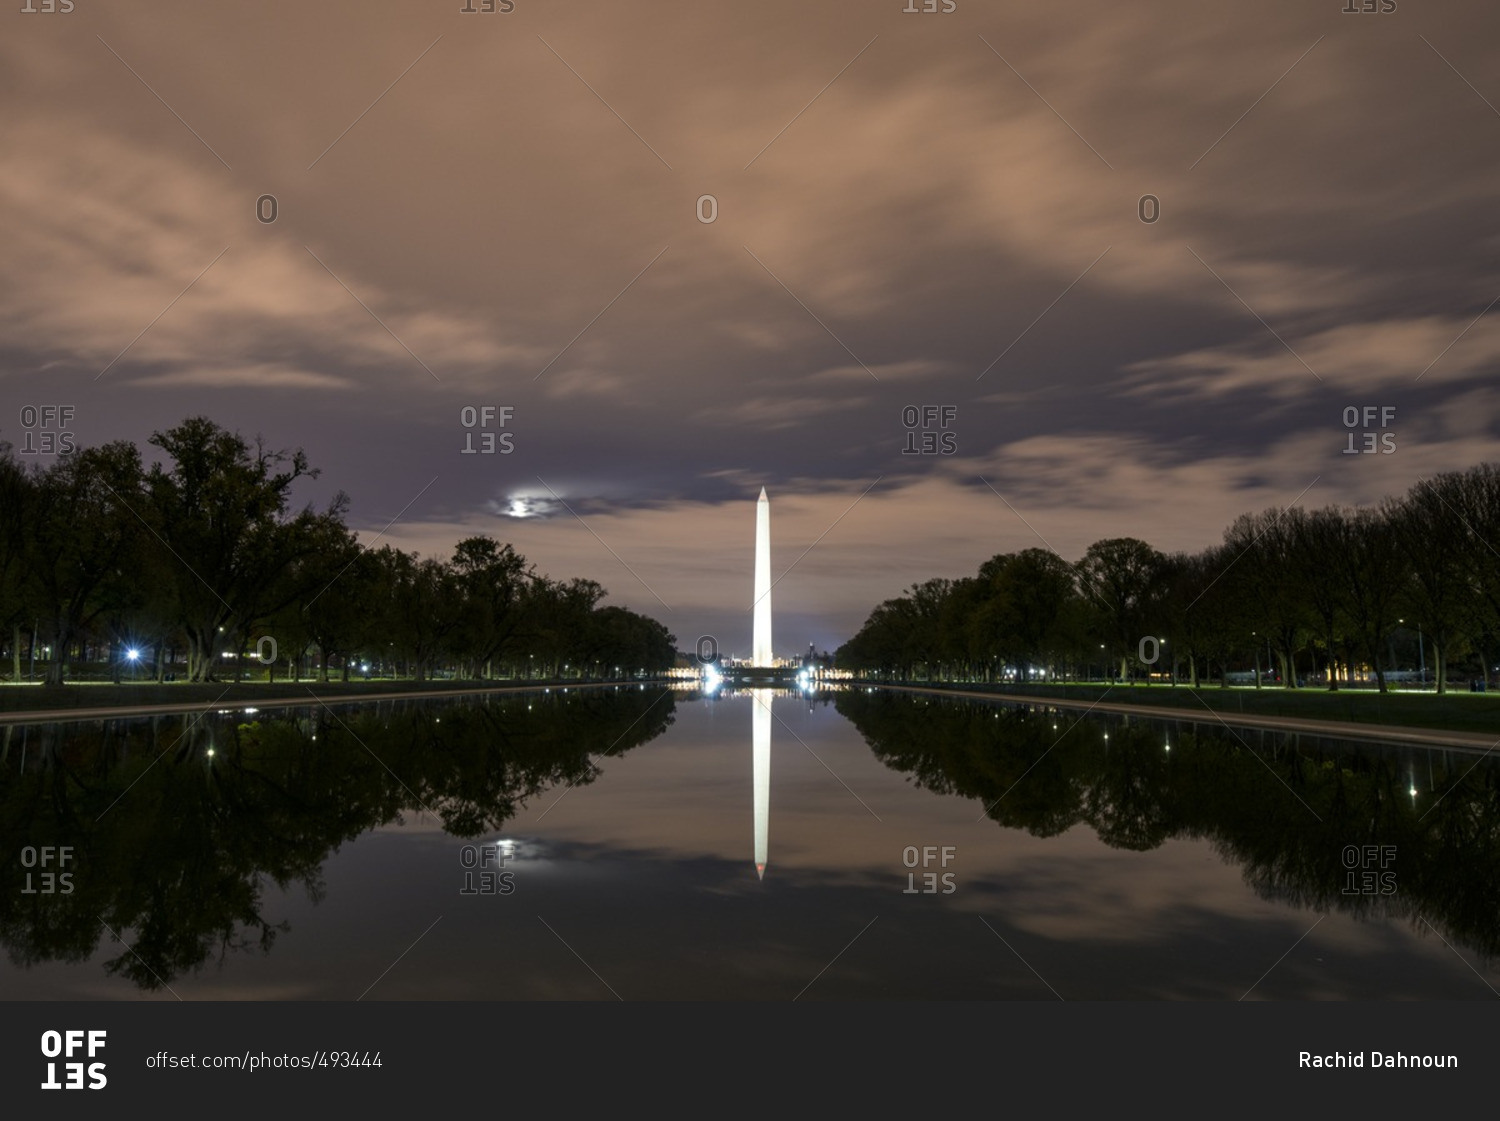 The Lincoln Memorial Reflecting Pool reflects the Washington Monument at night in the National Mall of Washington DC, USA.